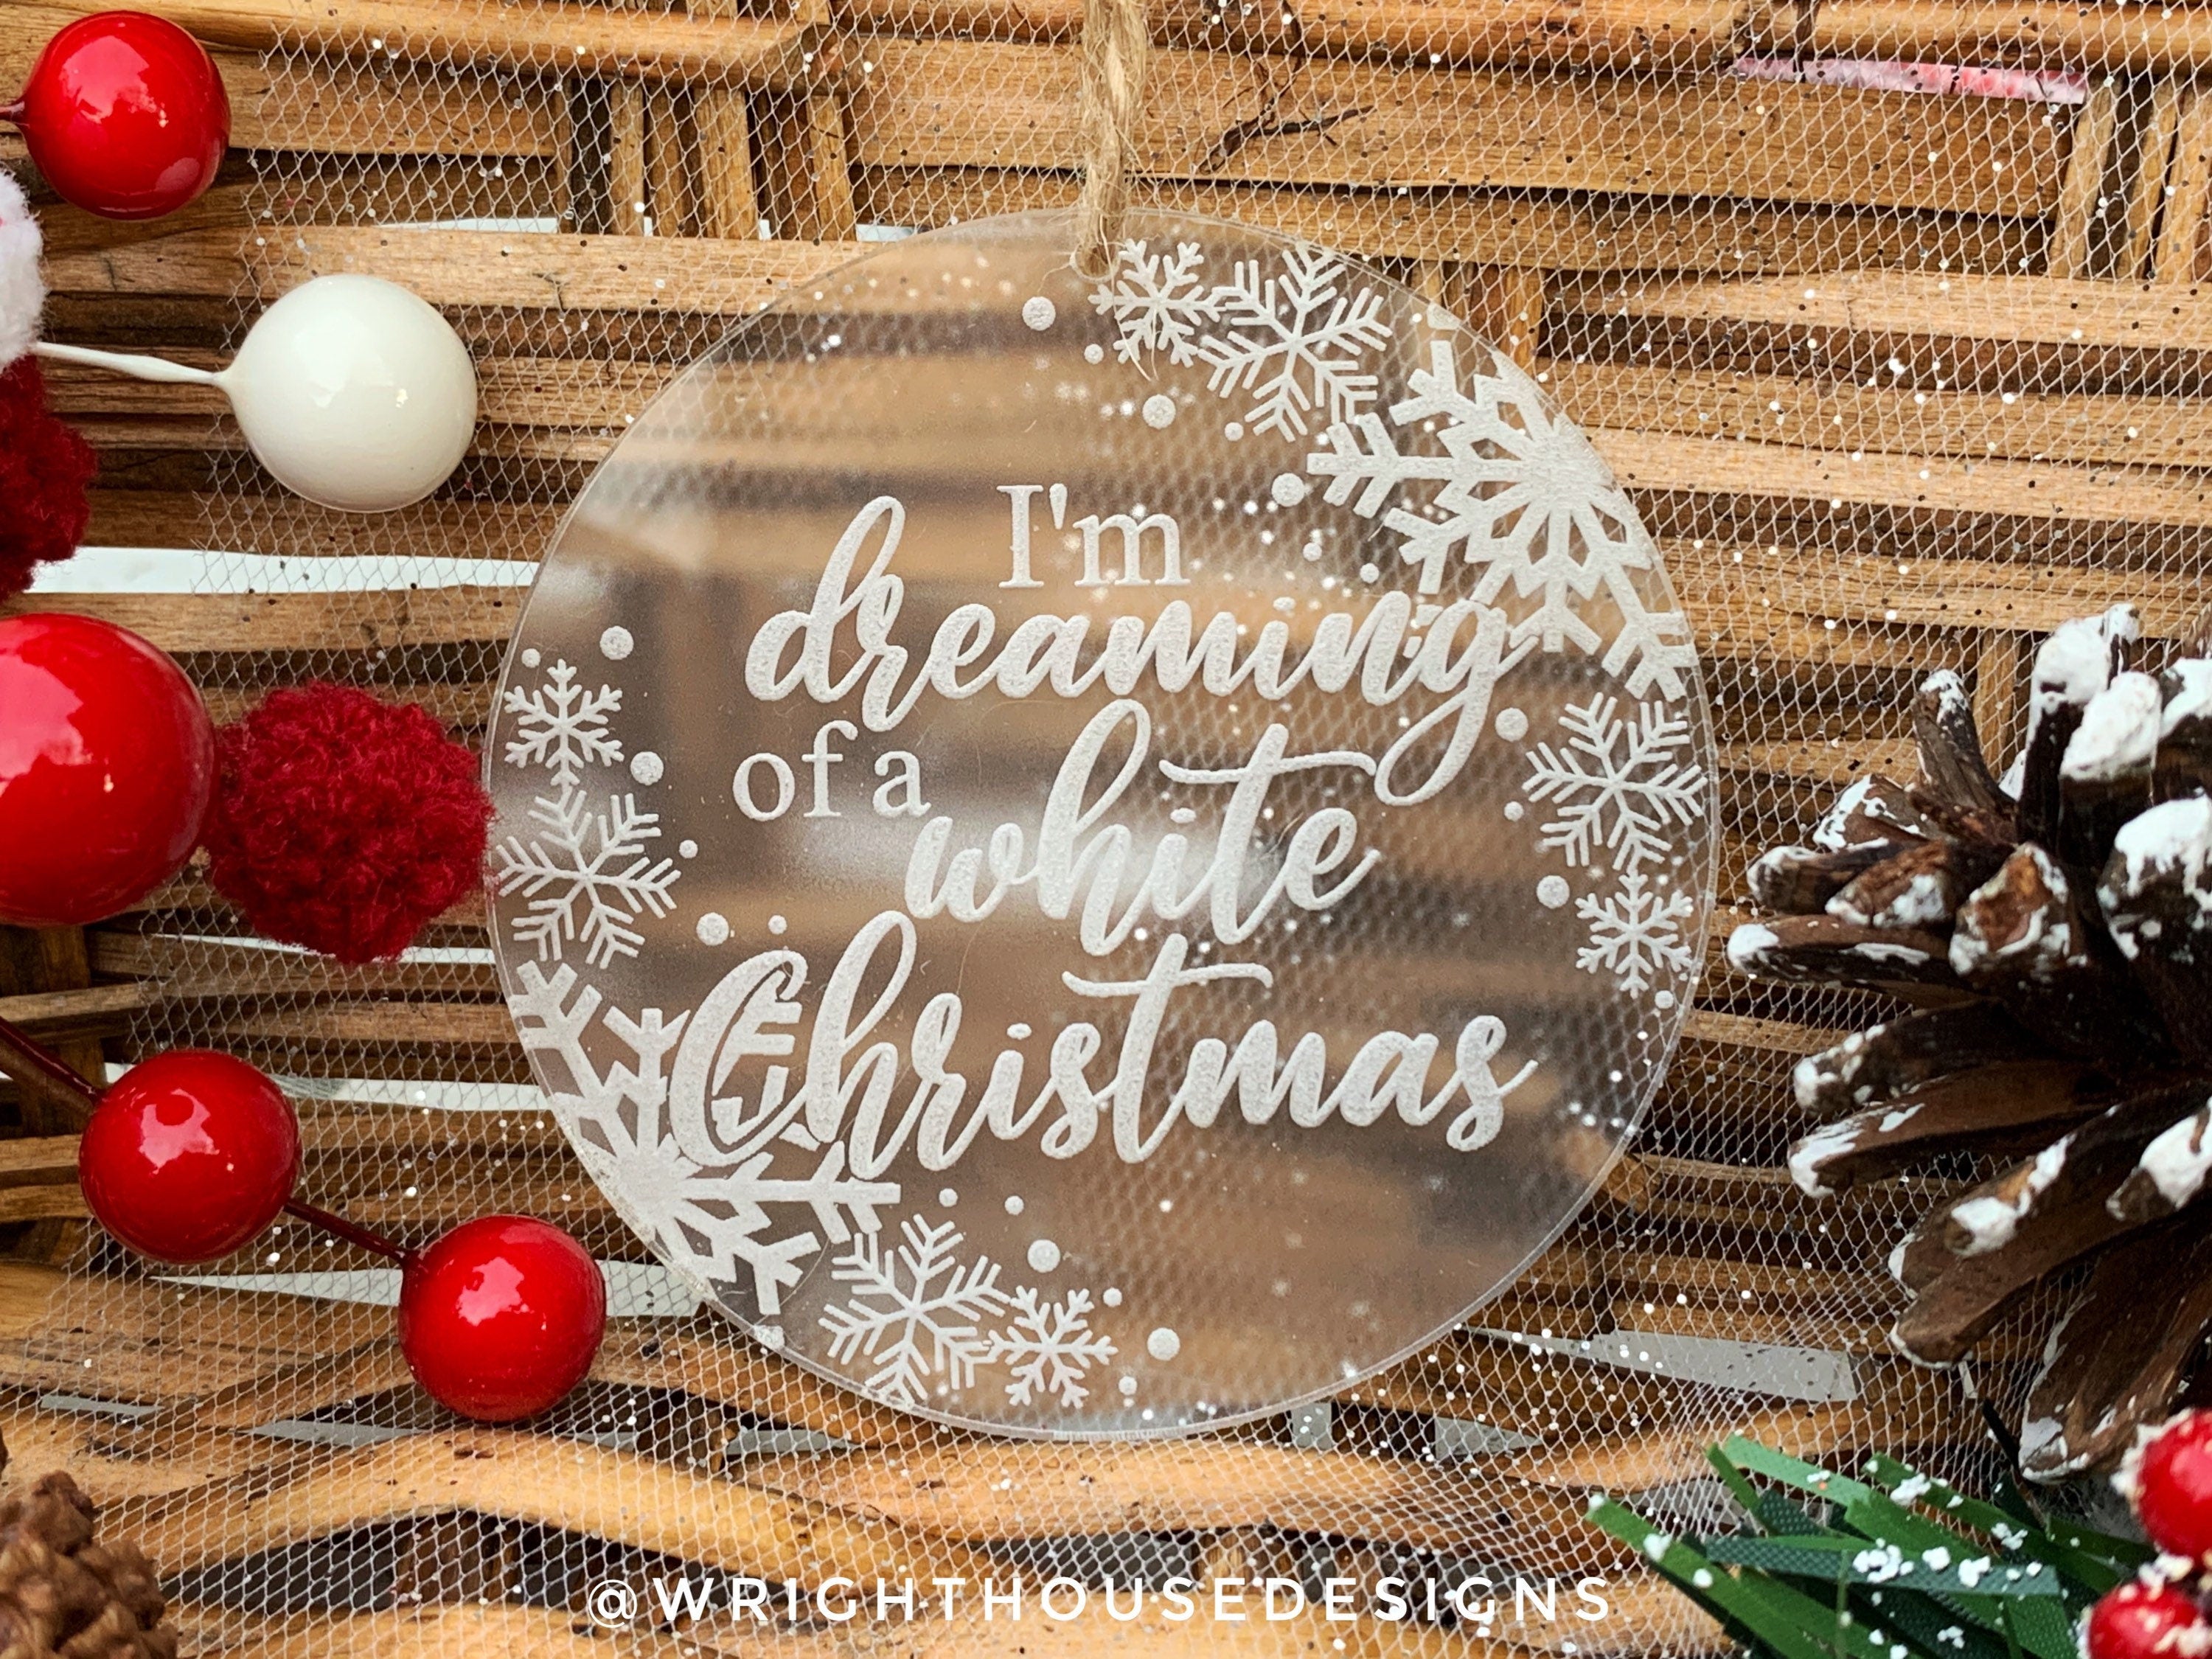 I'm Dreaming of a White Christmas - Laser Engraved Frosted Acrylic - Christmas Tree Ornament